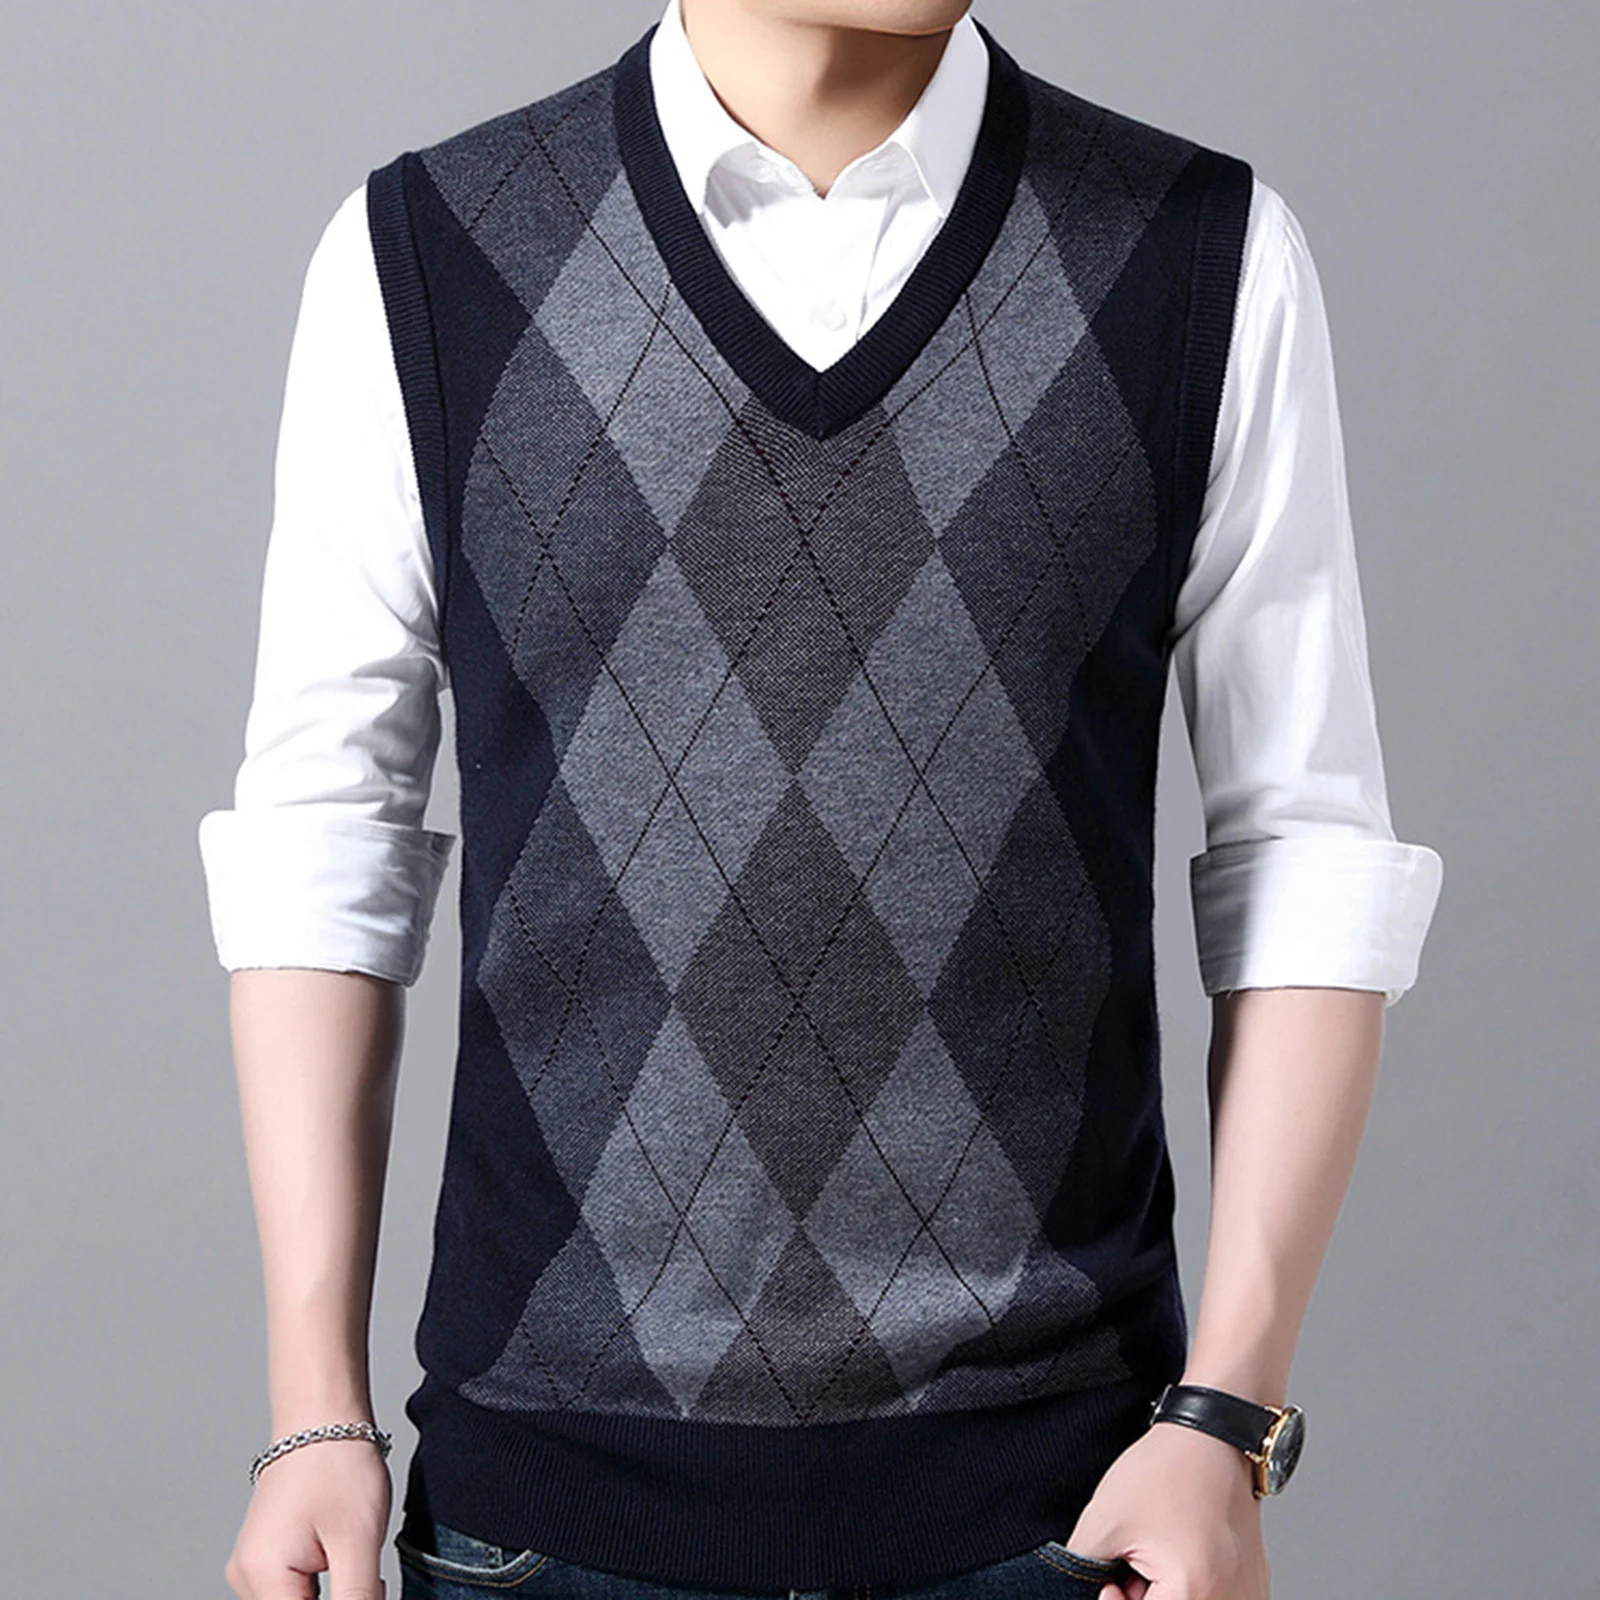 

Mens Argyle Knitted Vest Casual V Neck Slim Fit Sleeveless Sweater Pullover Knitwear for Work Office Party Holiday Travel